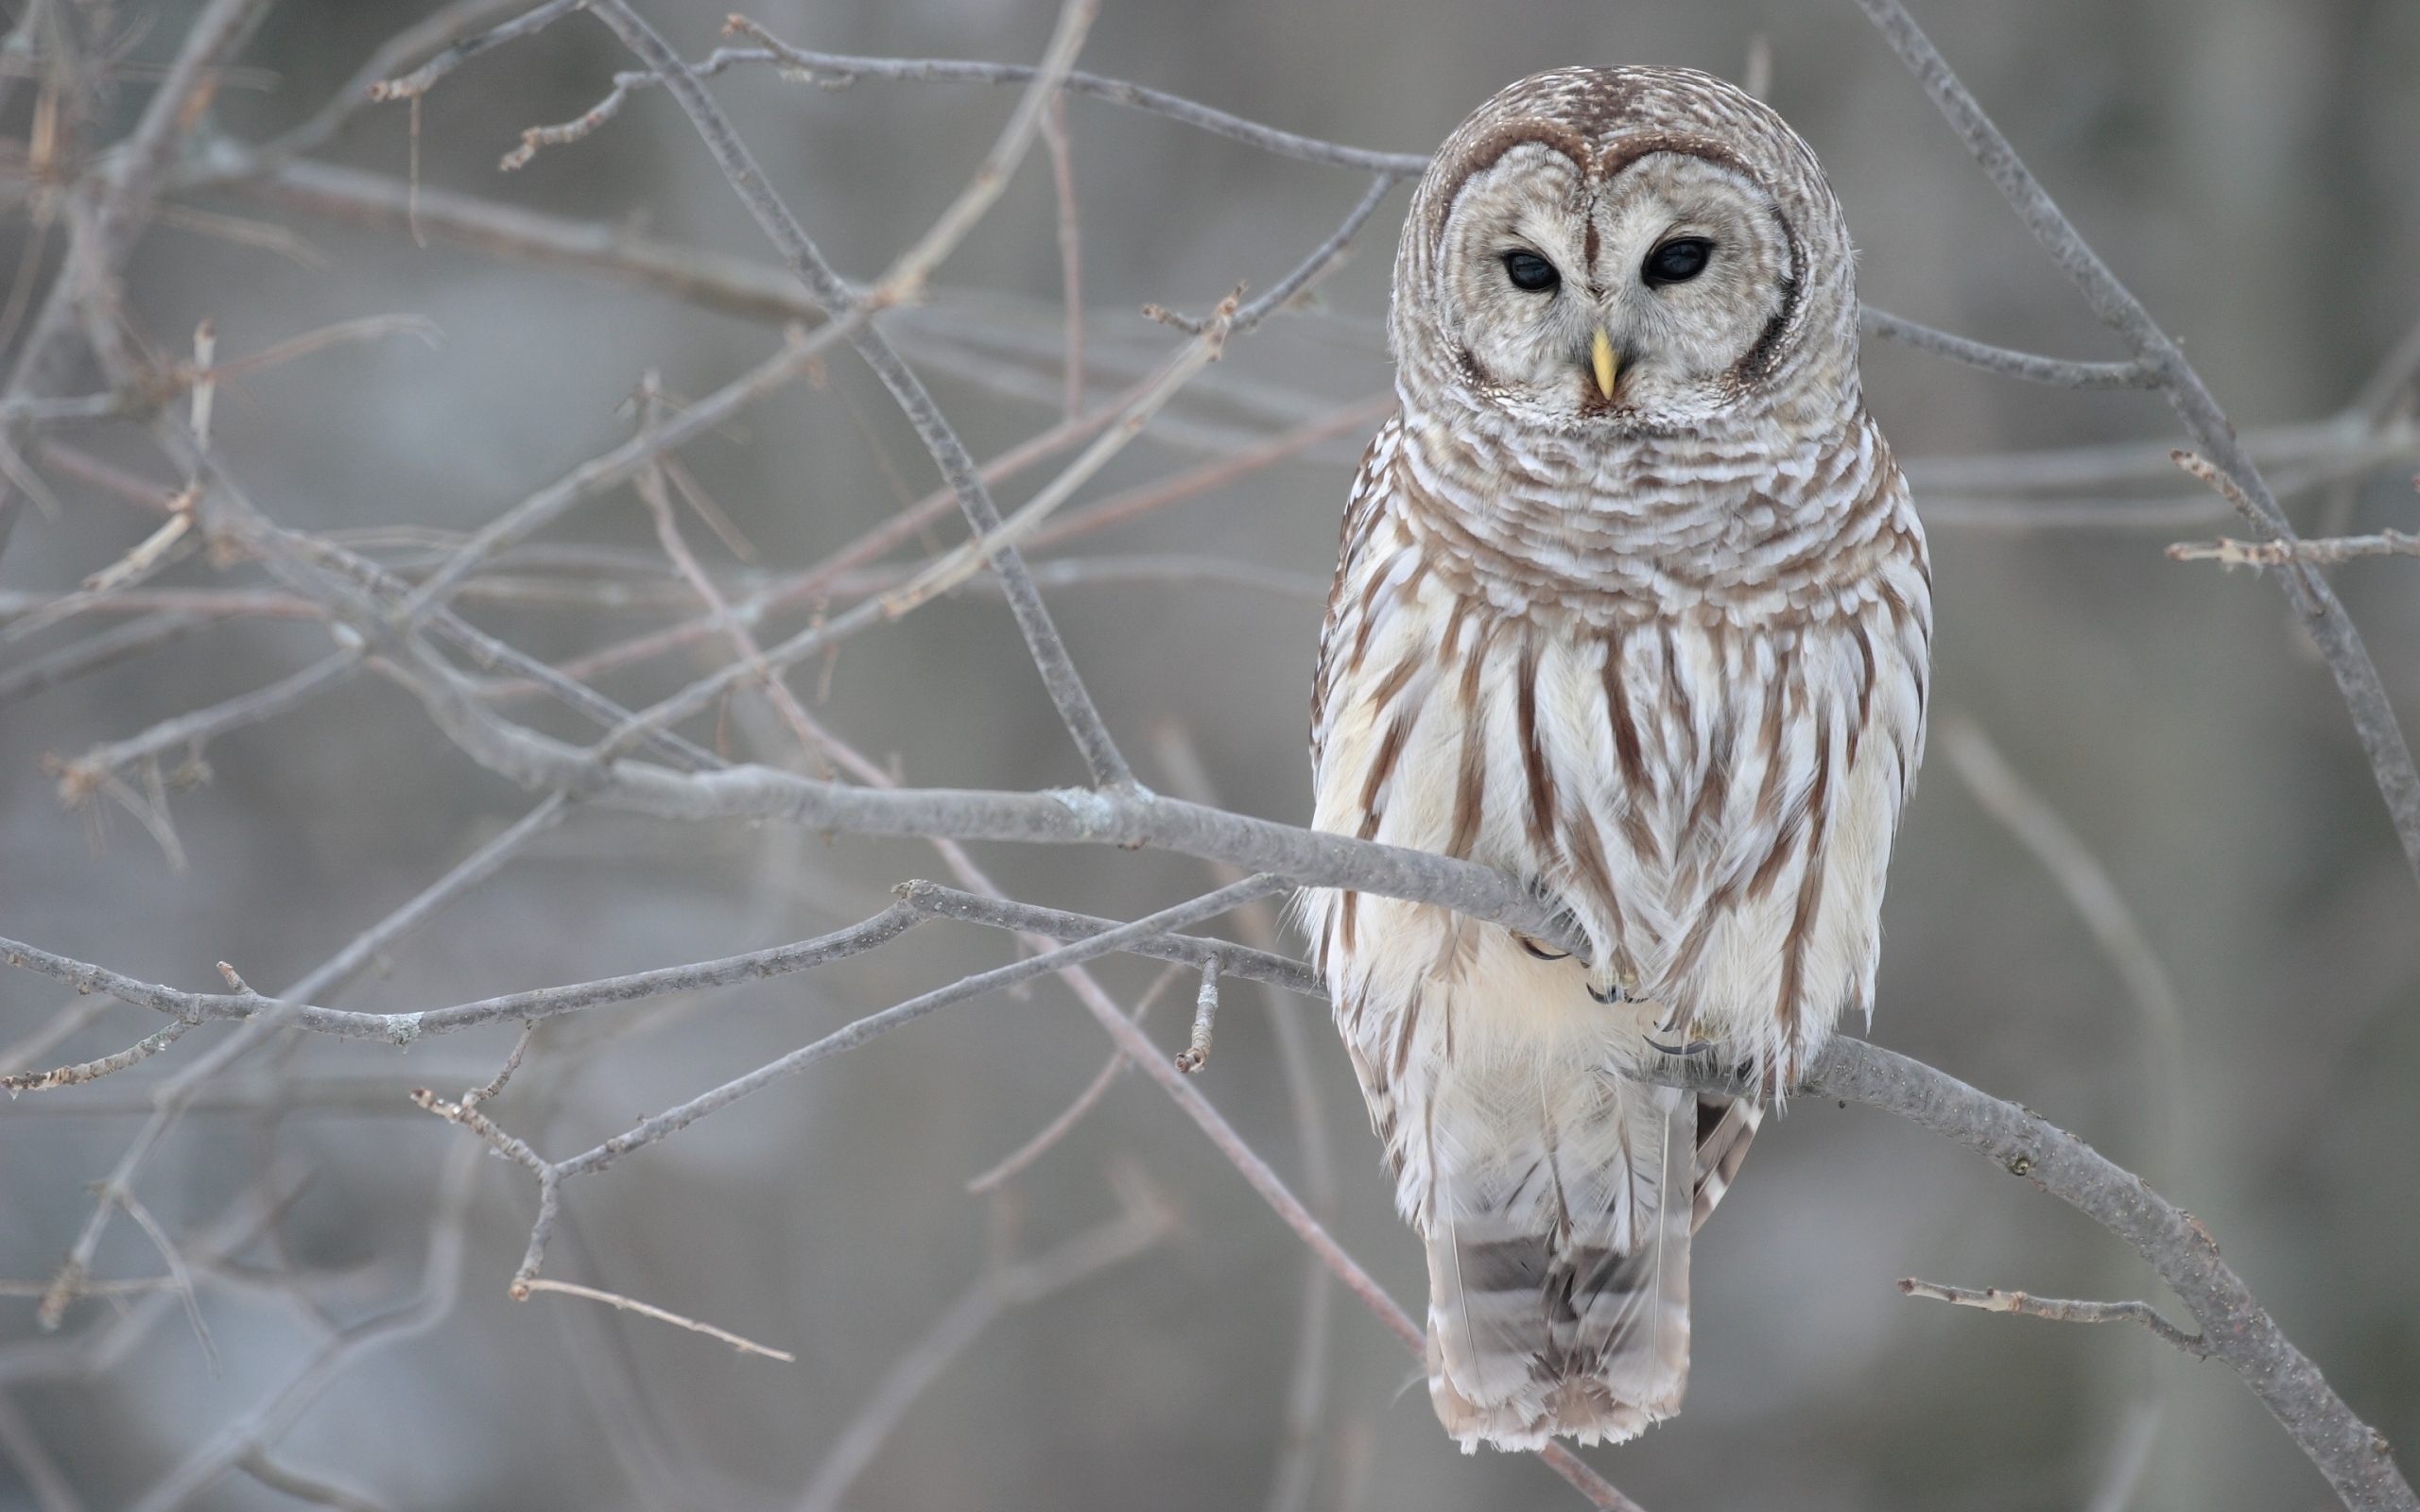 23594 download wallpaper owl, animals, birds, gray screensavers and pictures for free